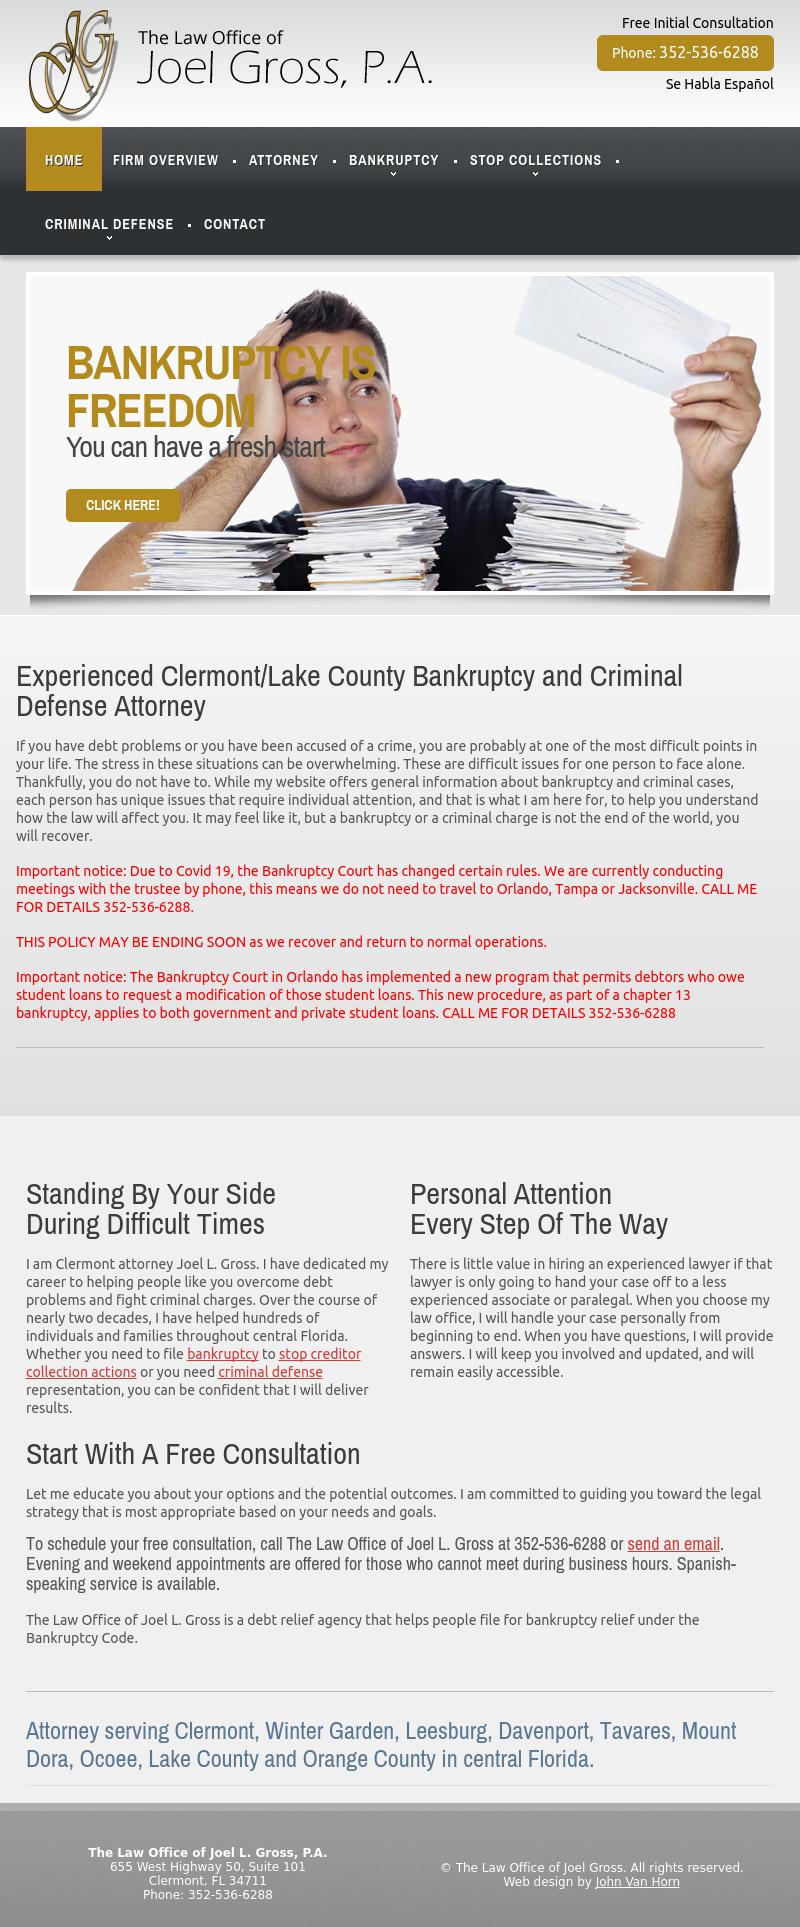 The Law Office of Joel L. Gross, P.A. - Clermont FL Lawyers